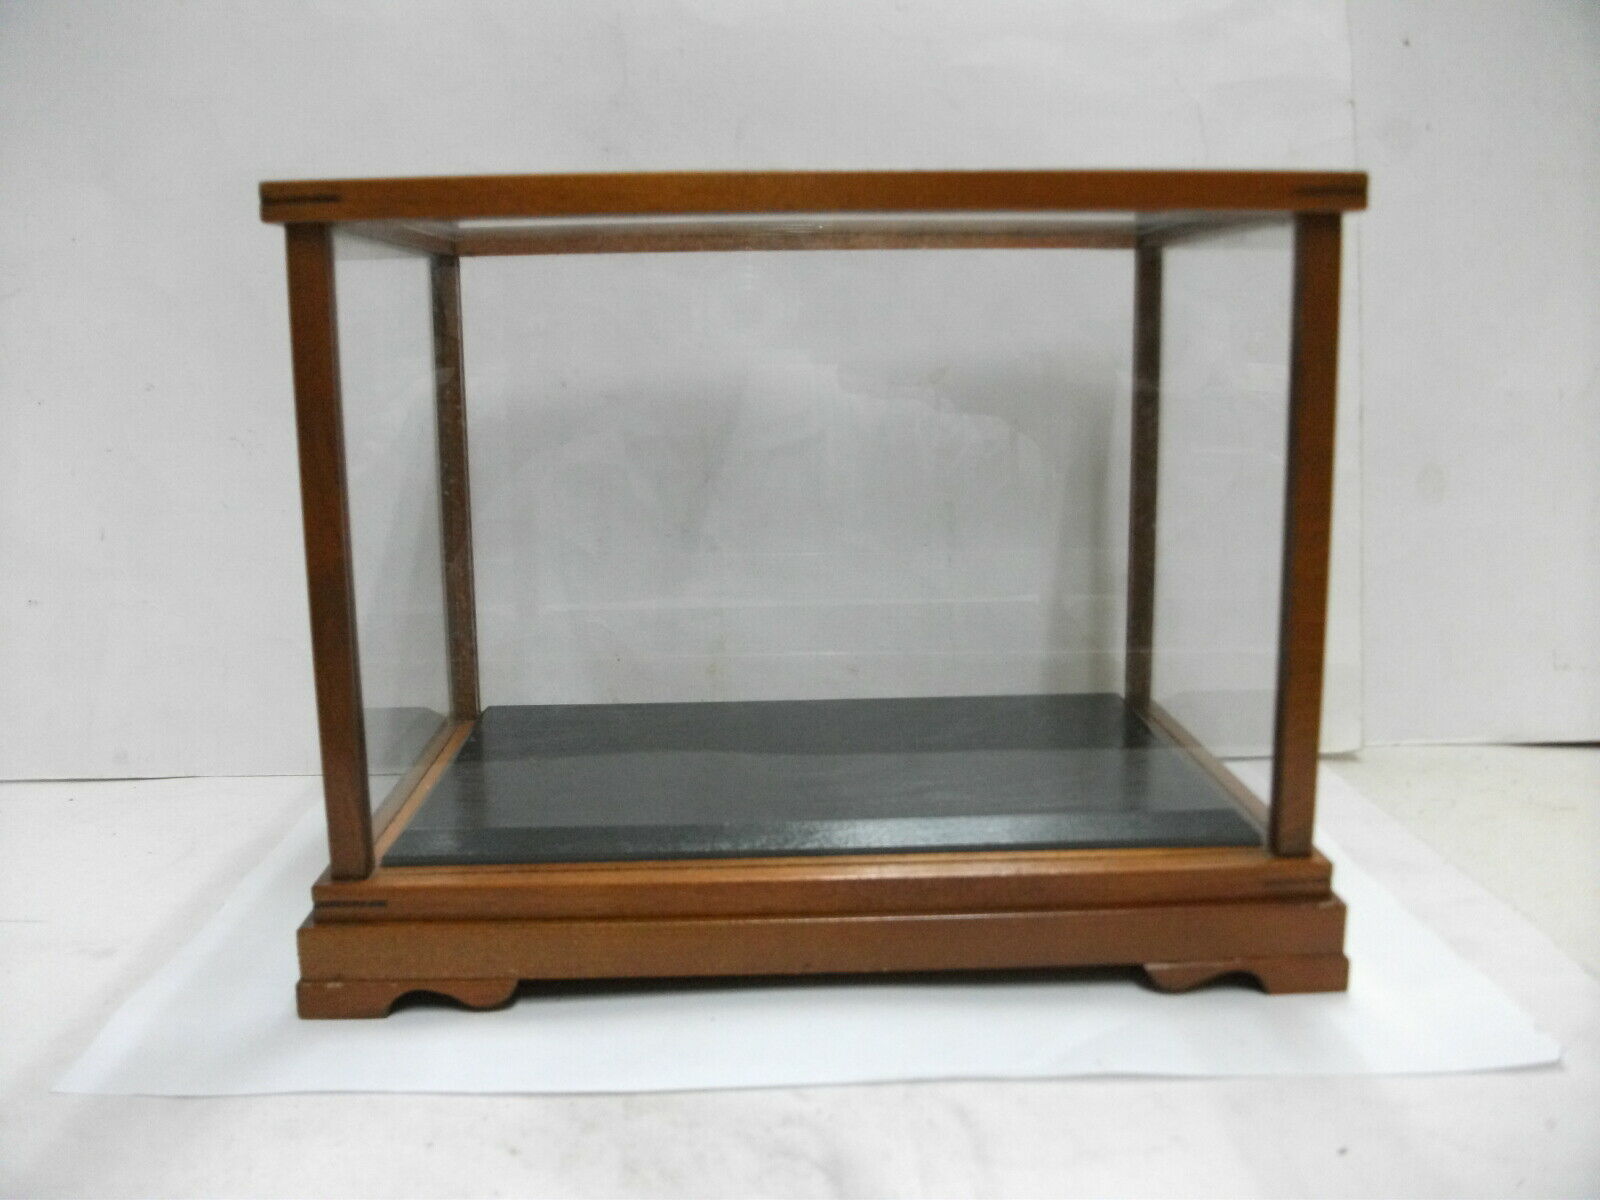 Glass Cases(display Cases)of The Wooden Frame. Japanese Antique.